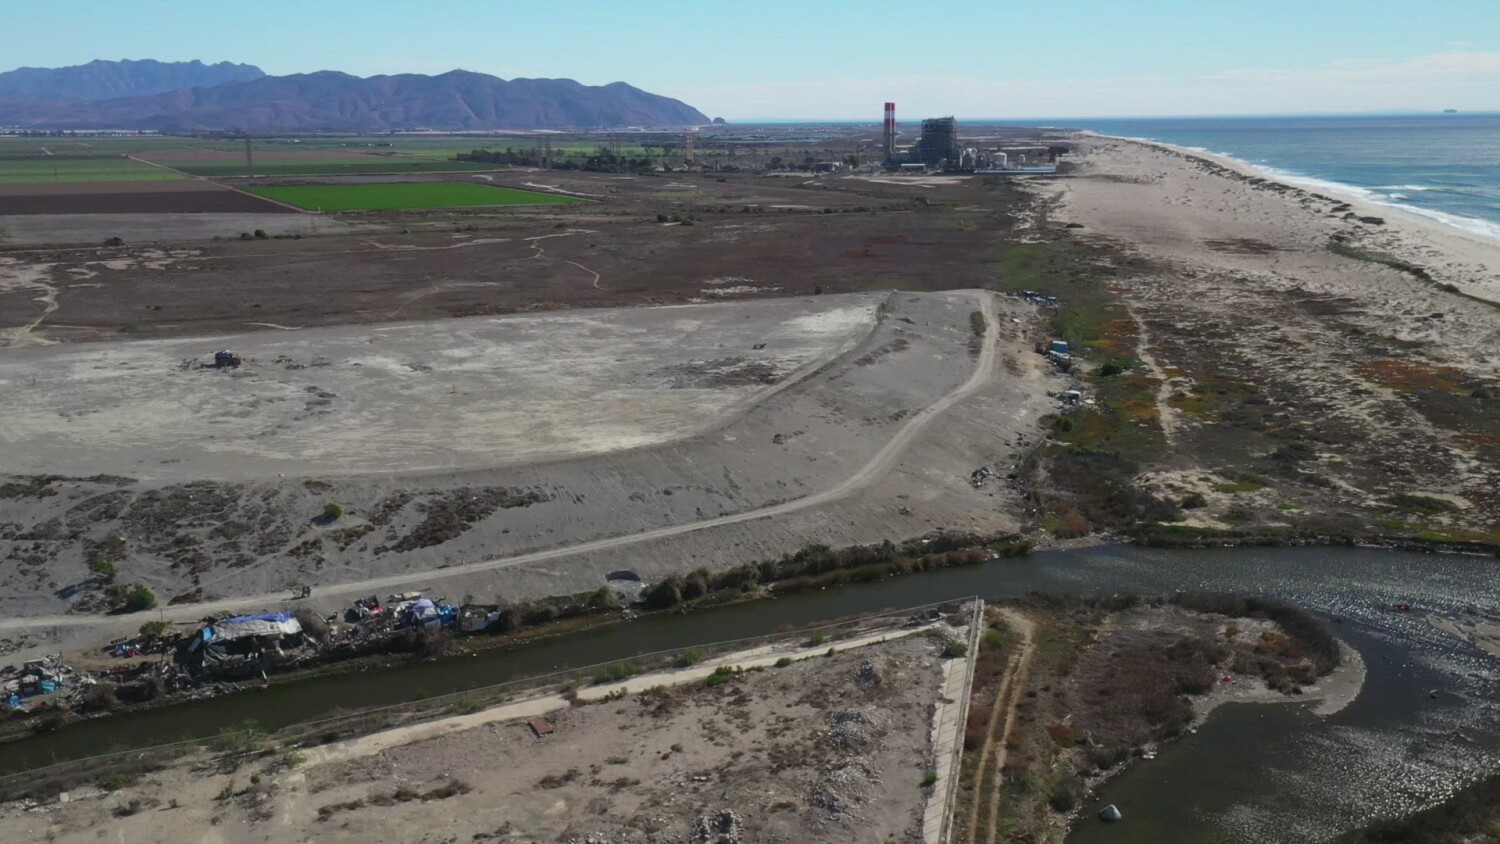 More than 400 toxic sites in California are at risk of flooding from sea level rise